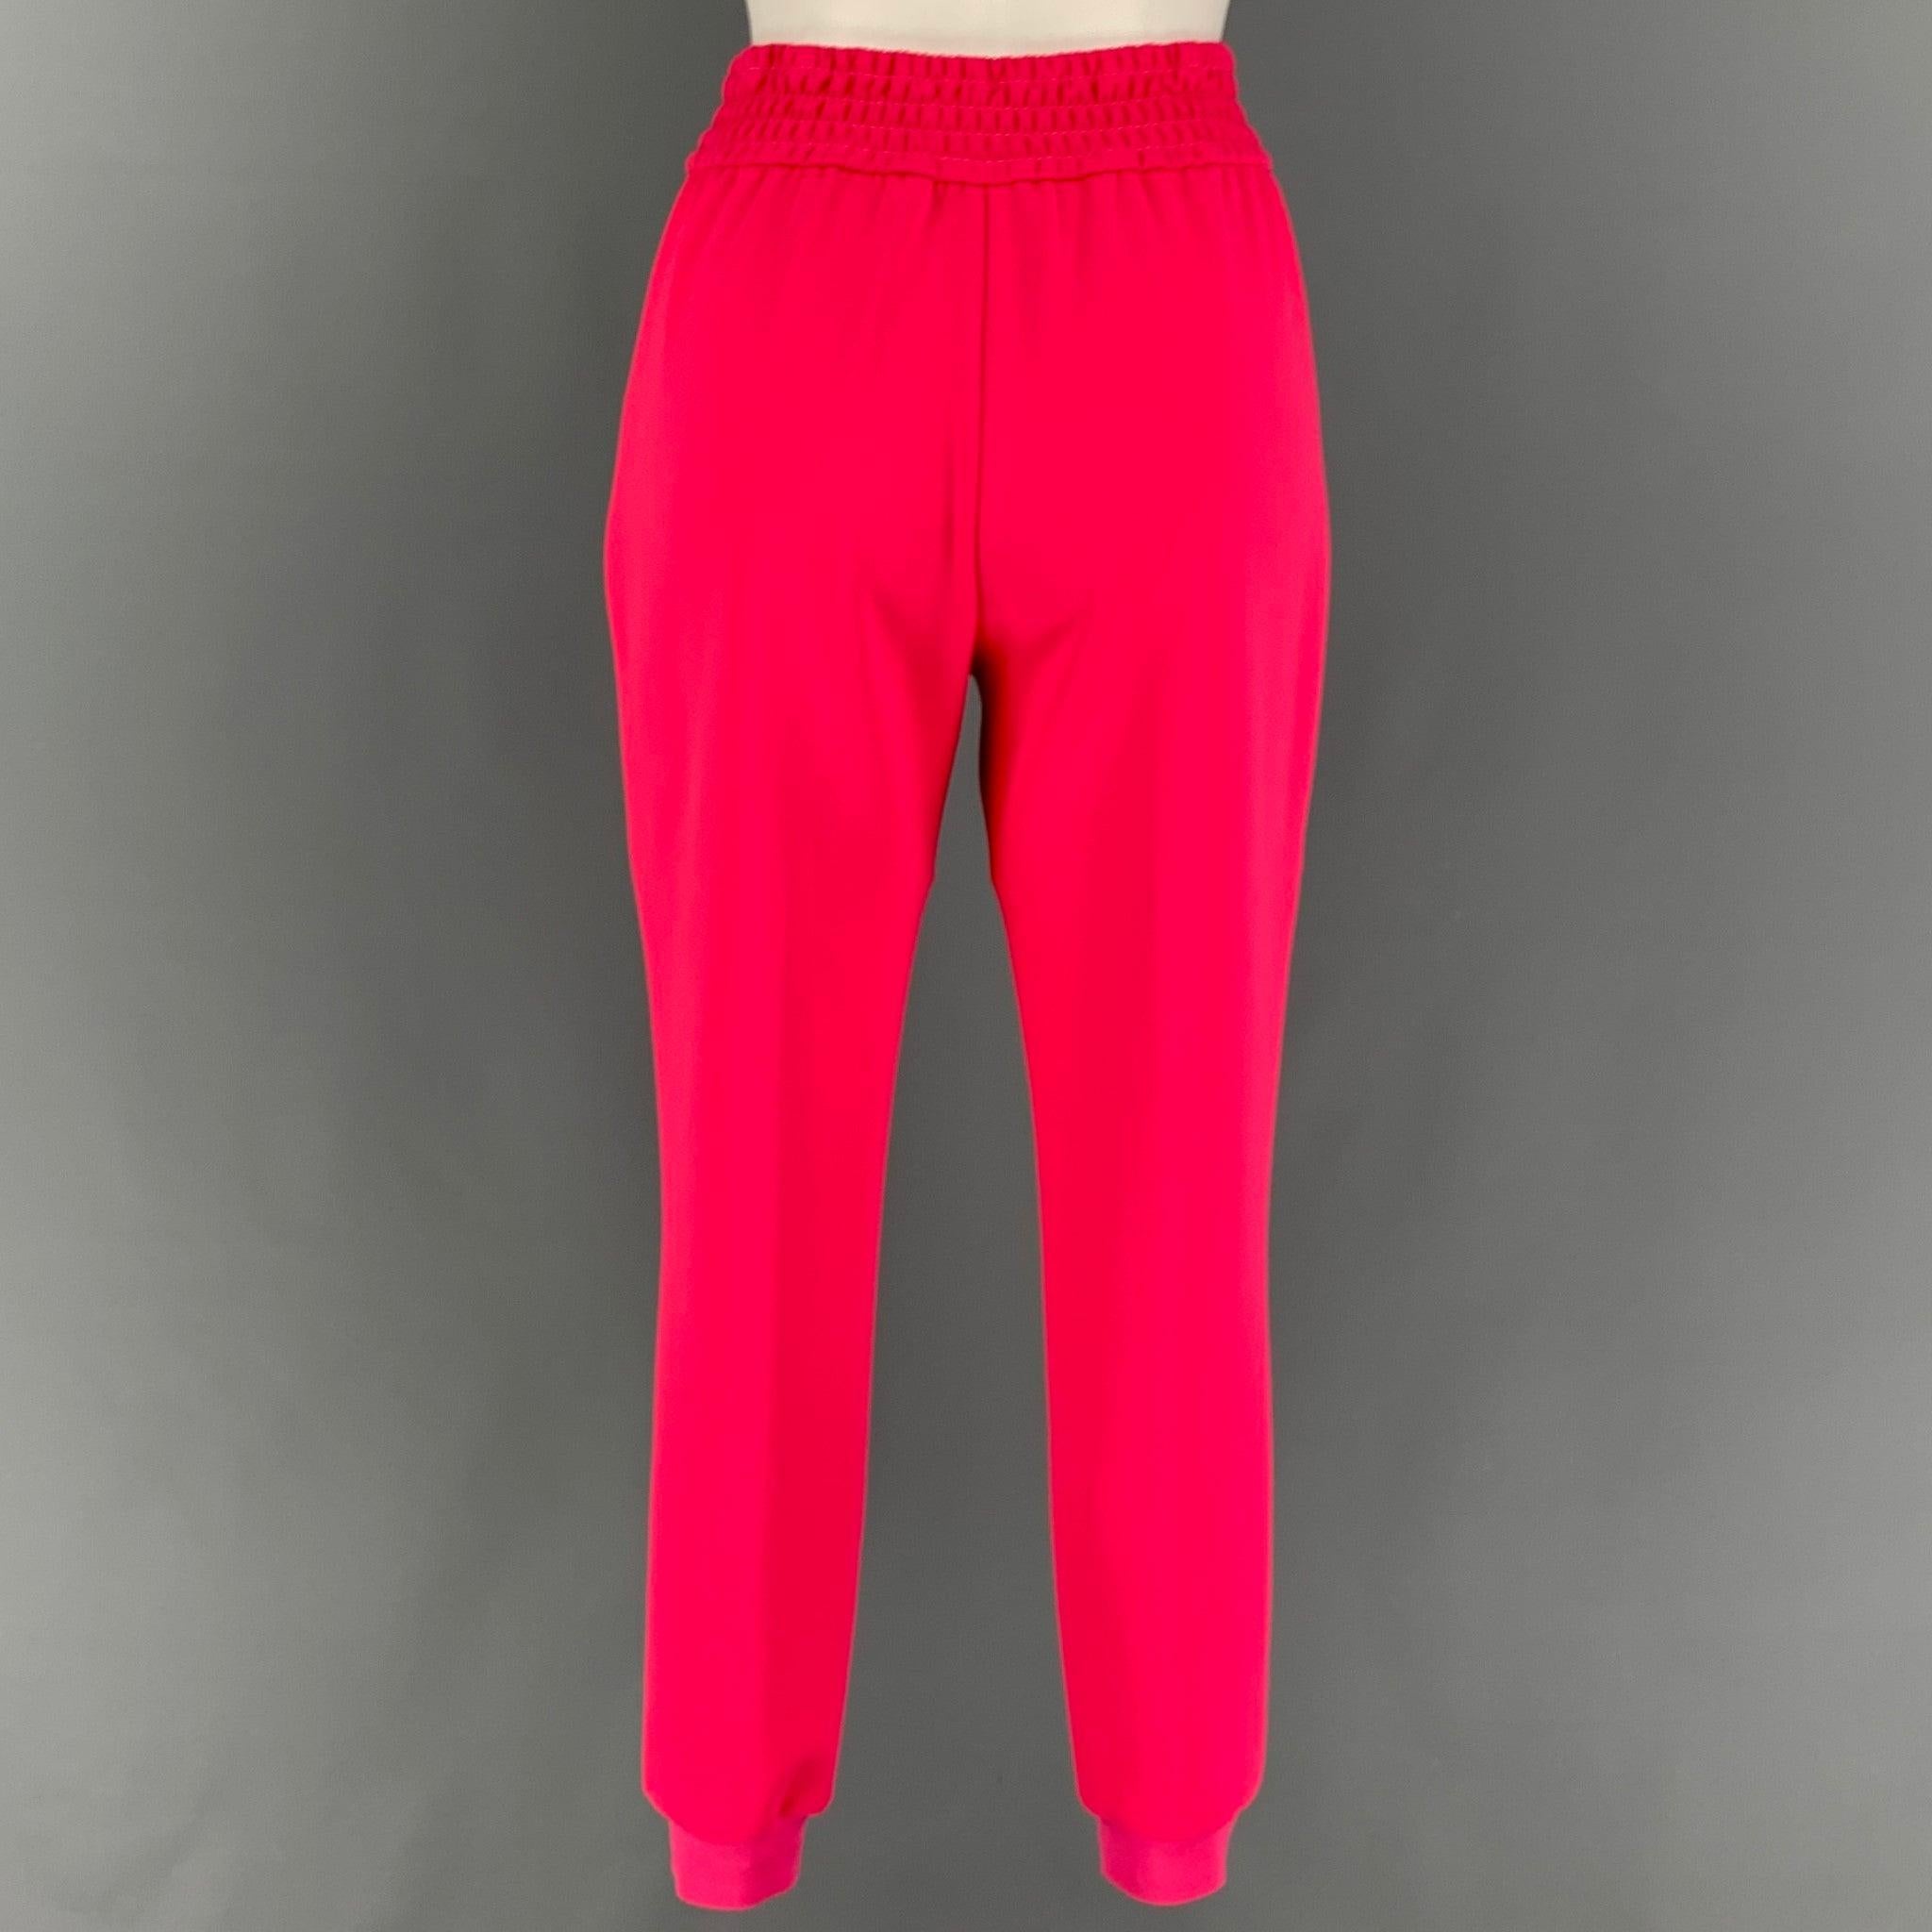 ALICE + OLIVIA pants comes in a pink polyester featuring a pleated front, jogger style, slit pockets, and a elastic waistband.
Very Good
Pre-Owned Condition. 

Marked:   4 

Measurements: 
  Waist: 24 inches  Rise: 11 inches  Inseam: 27.5 inches 
 